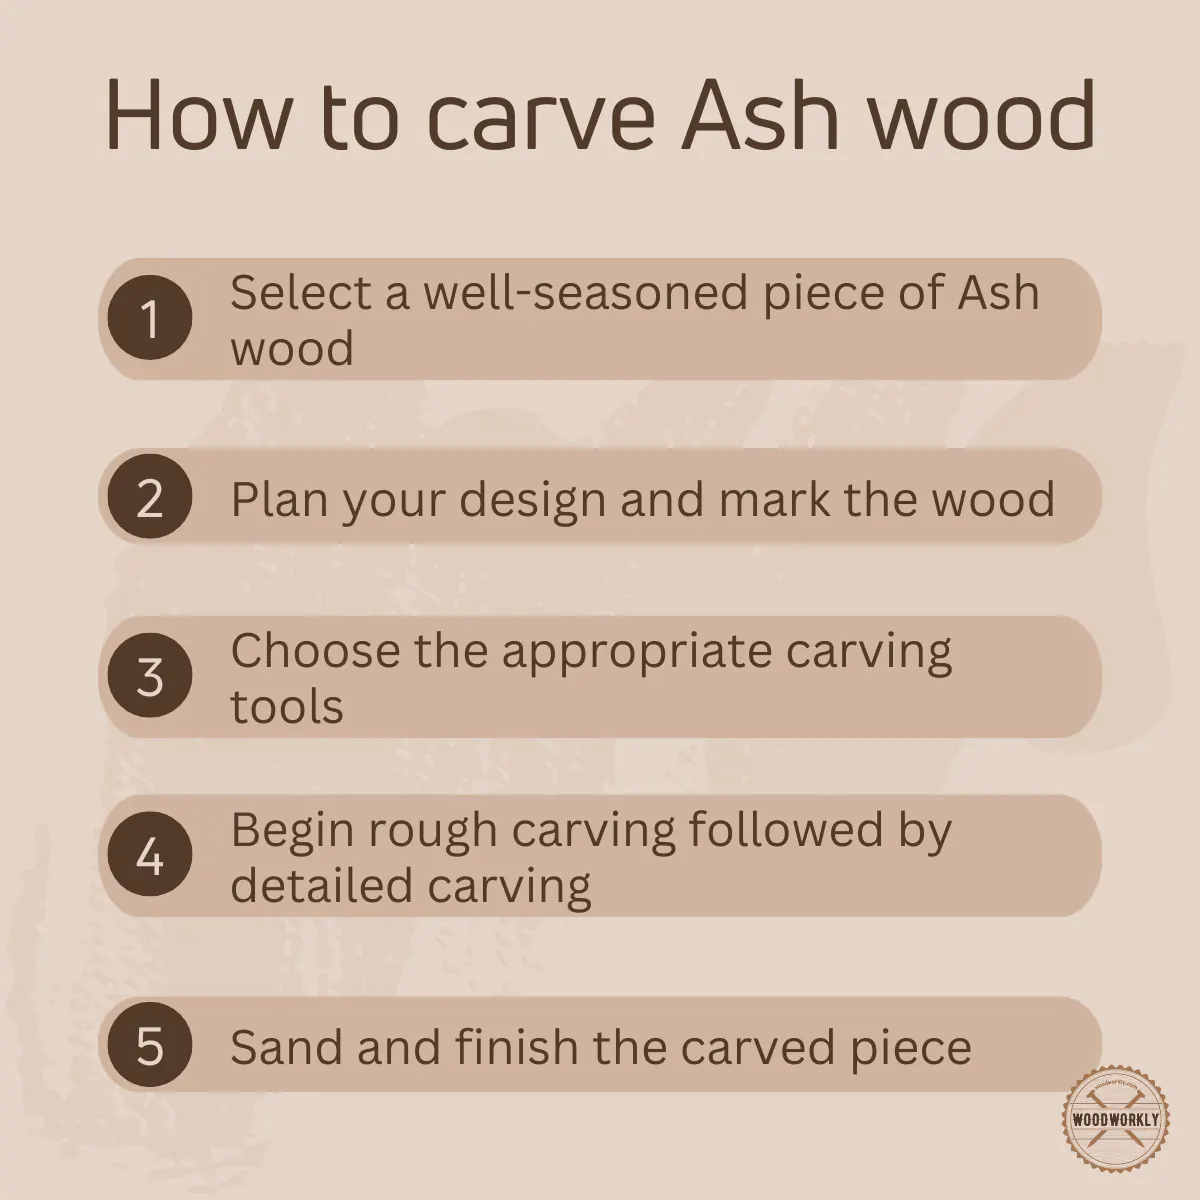 How to carve Ash wood